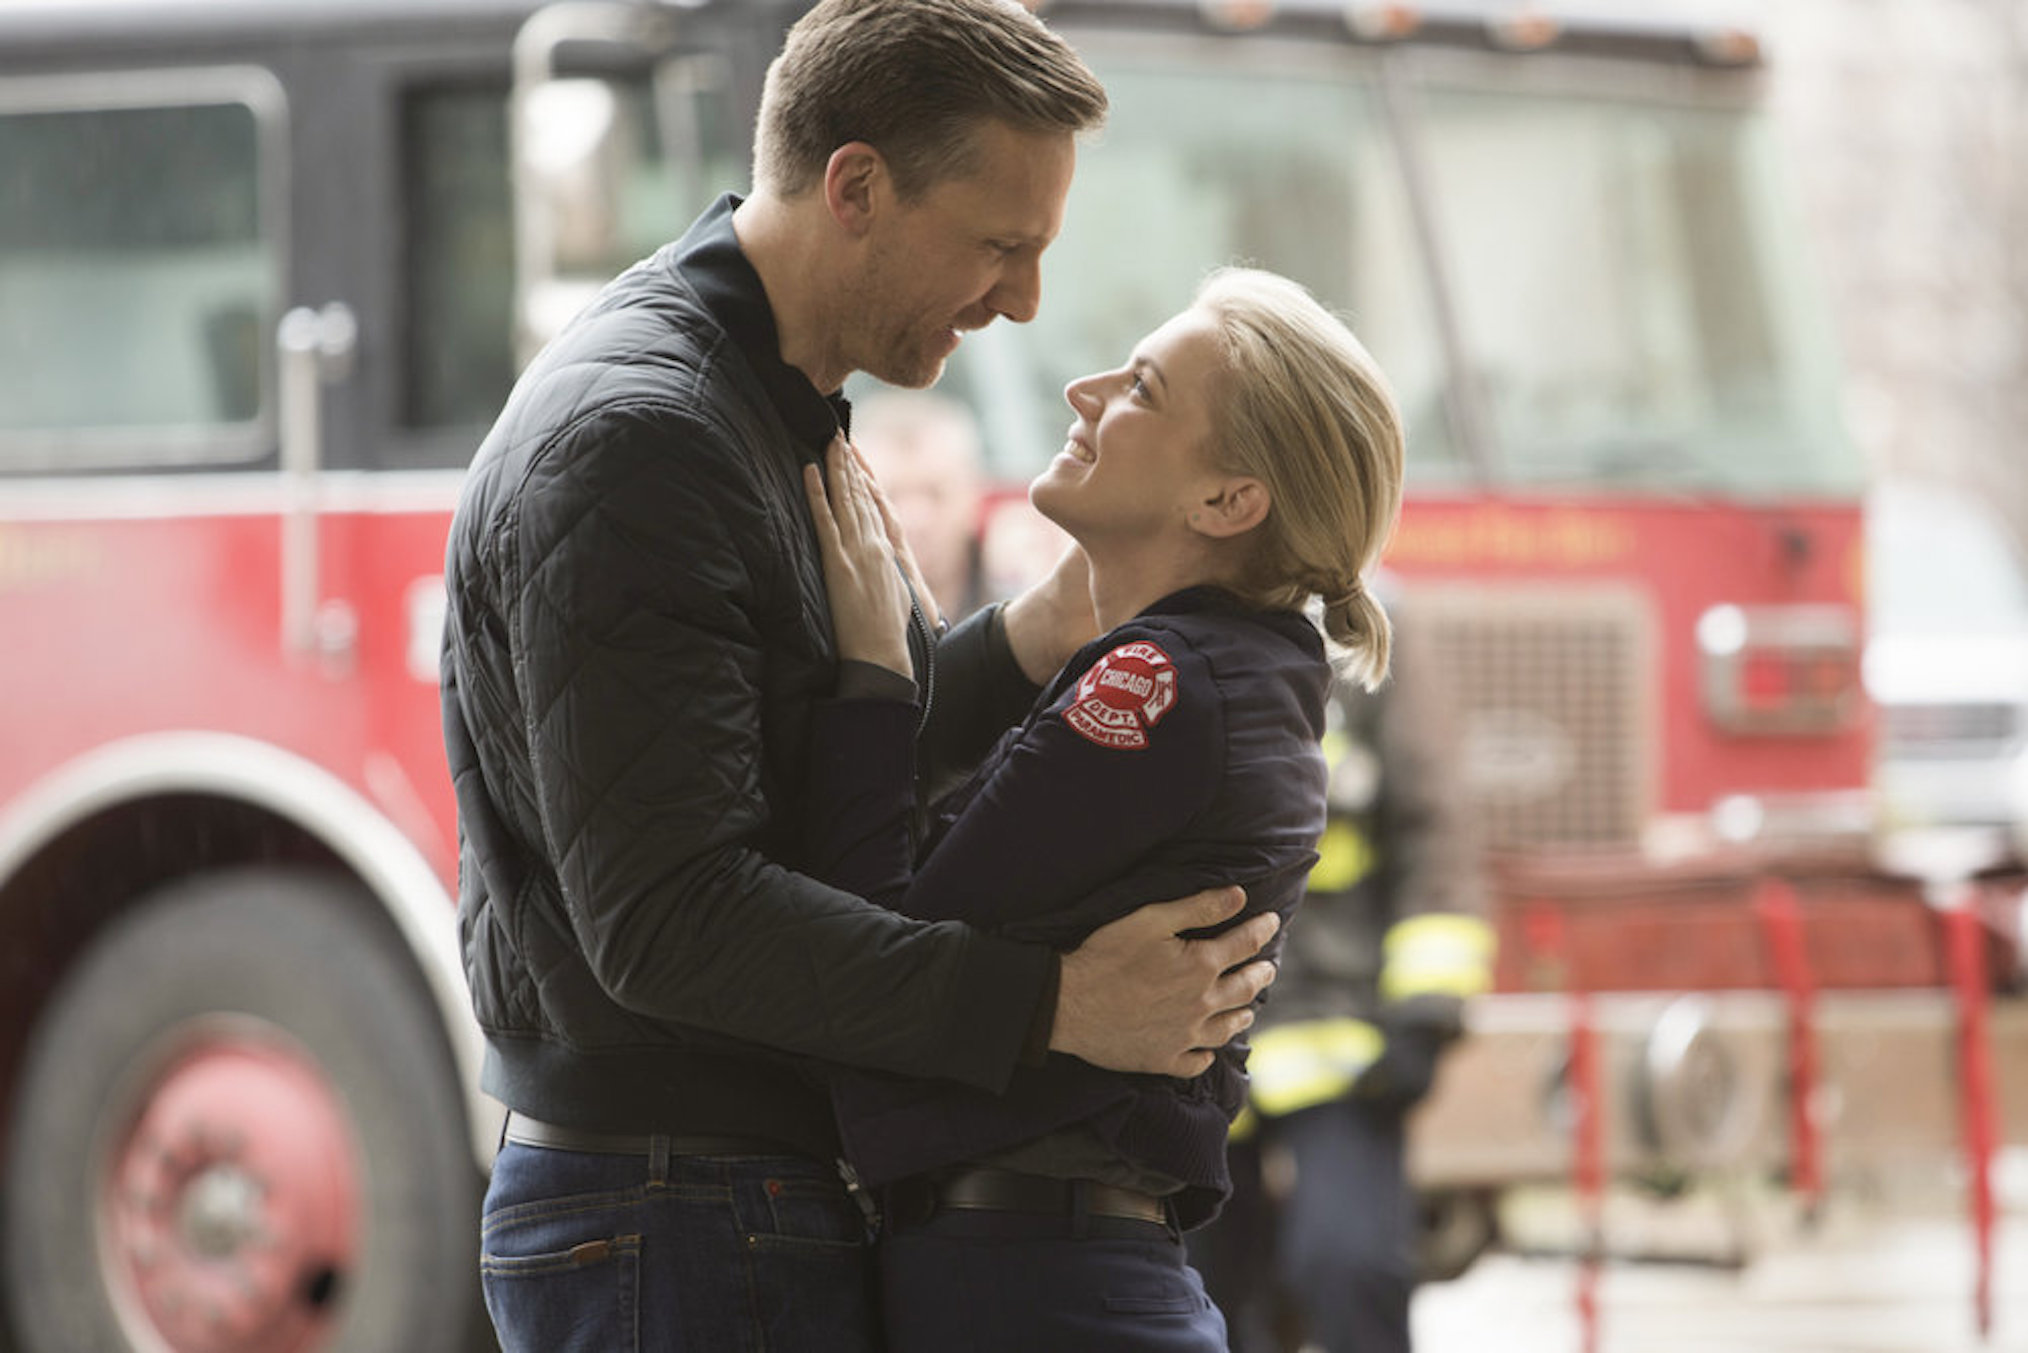 A fire breaks out at a pet food factory, and casey and severide help the ow...